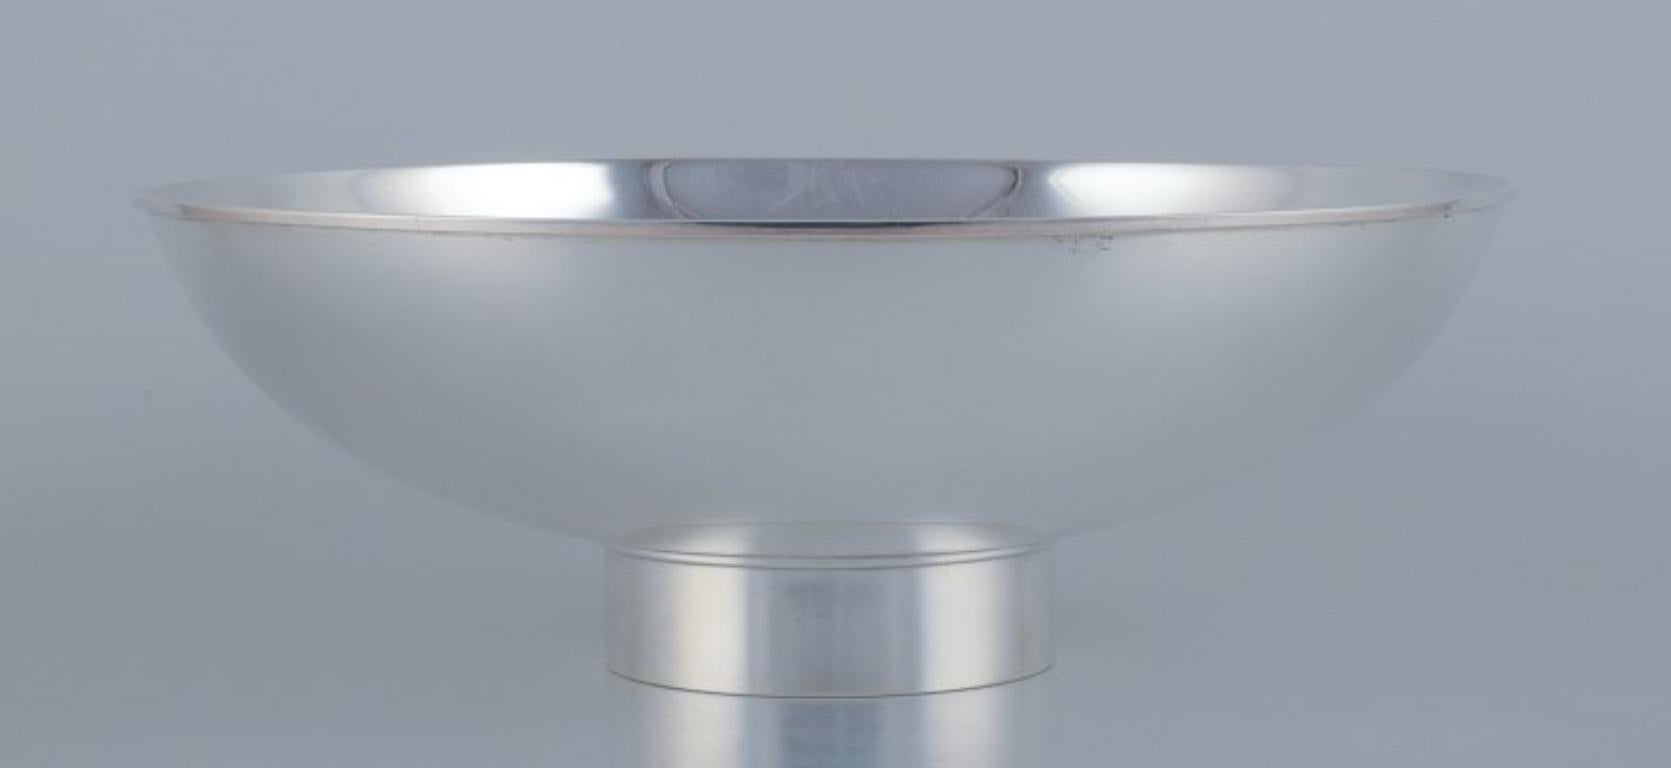 Søren Georg Jensen for Georg Jensen, large and impressive bowl in sterling silver.
Approximately from the 1980s.
Model number: 1133A.
Weight 27,4 oz.
Stamped.
Perfect condition.
Dimensions: D 27.2 cm x H 9.5 cm.